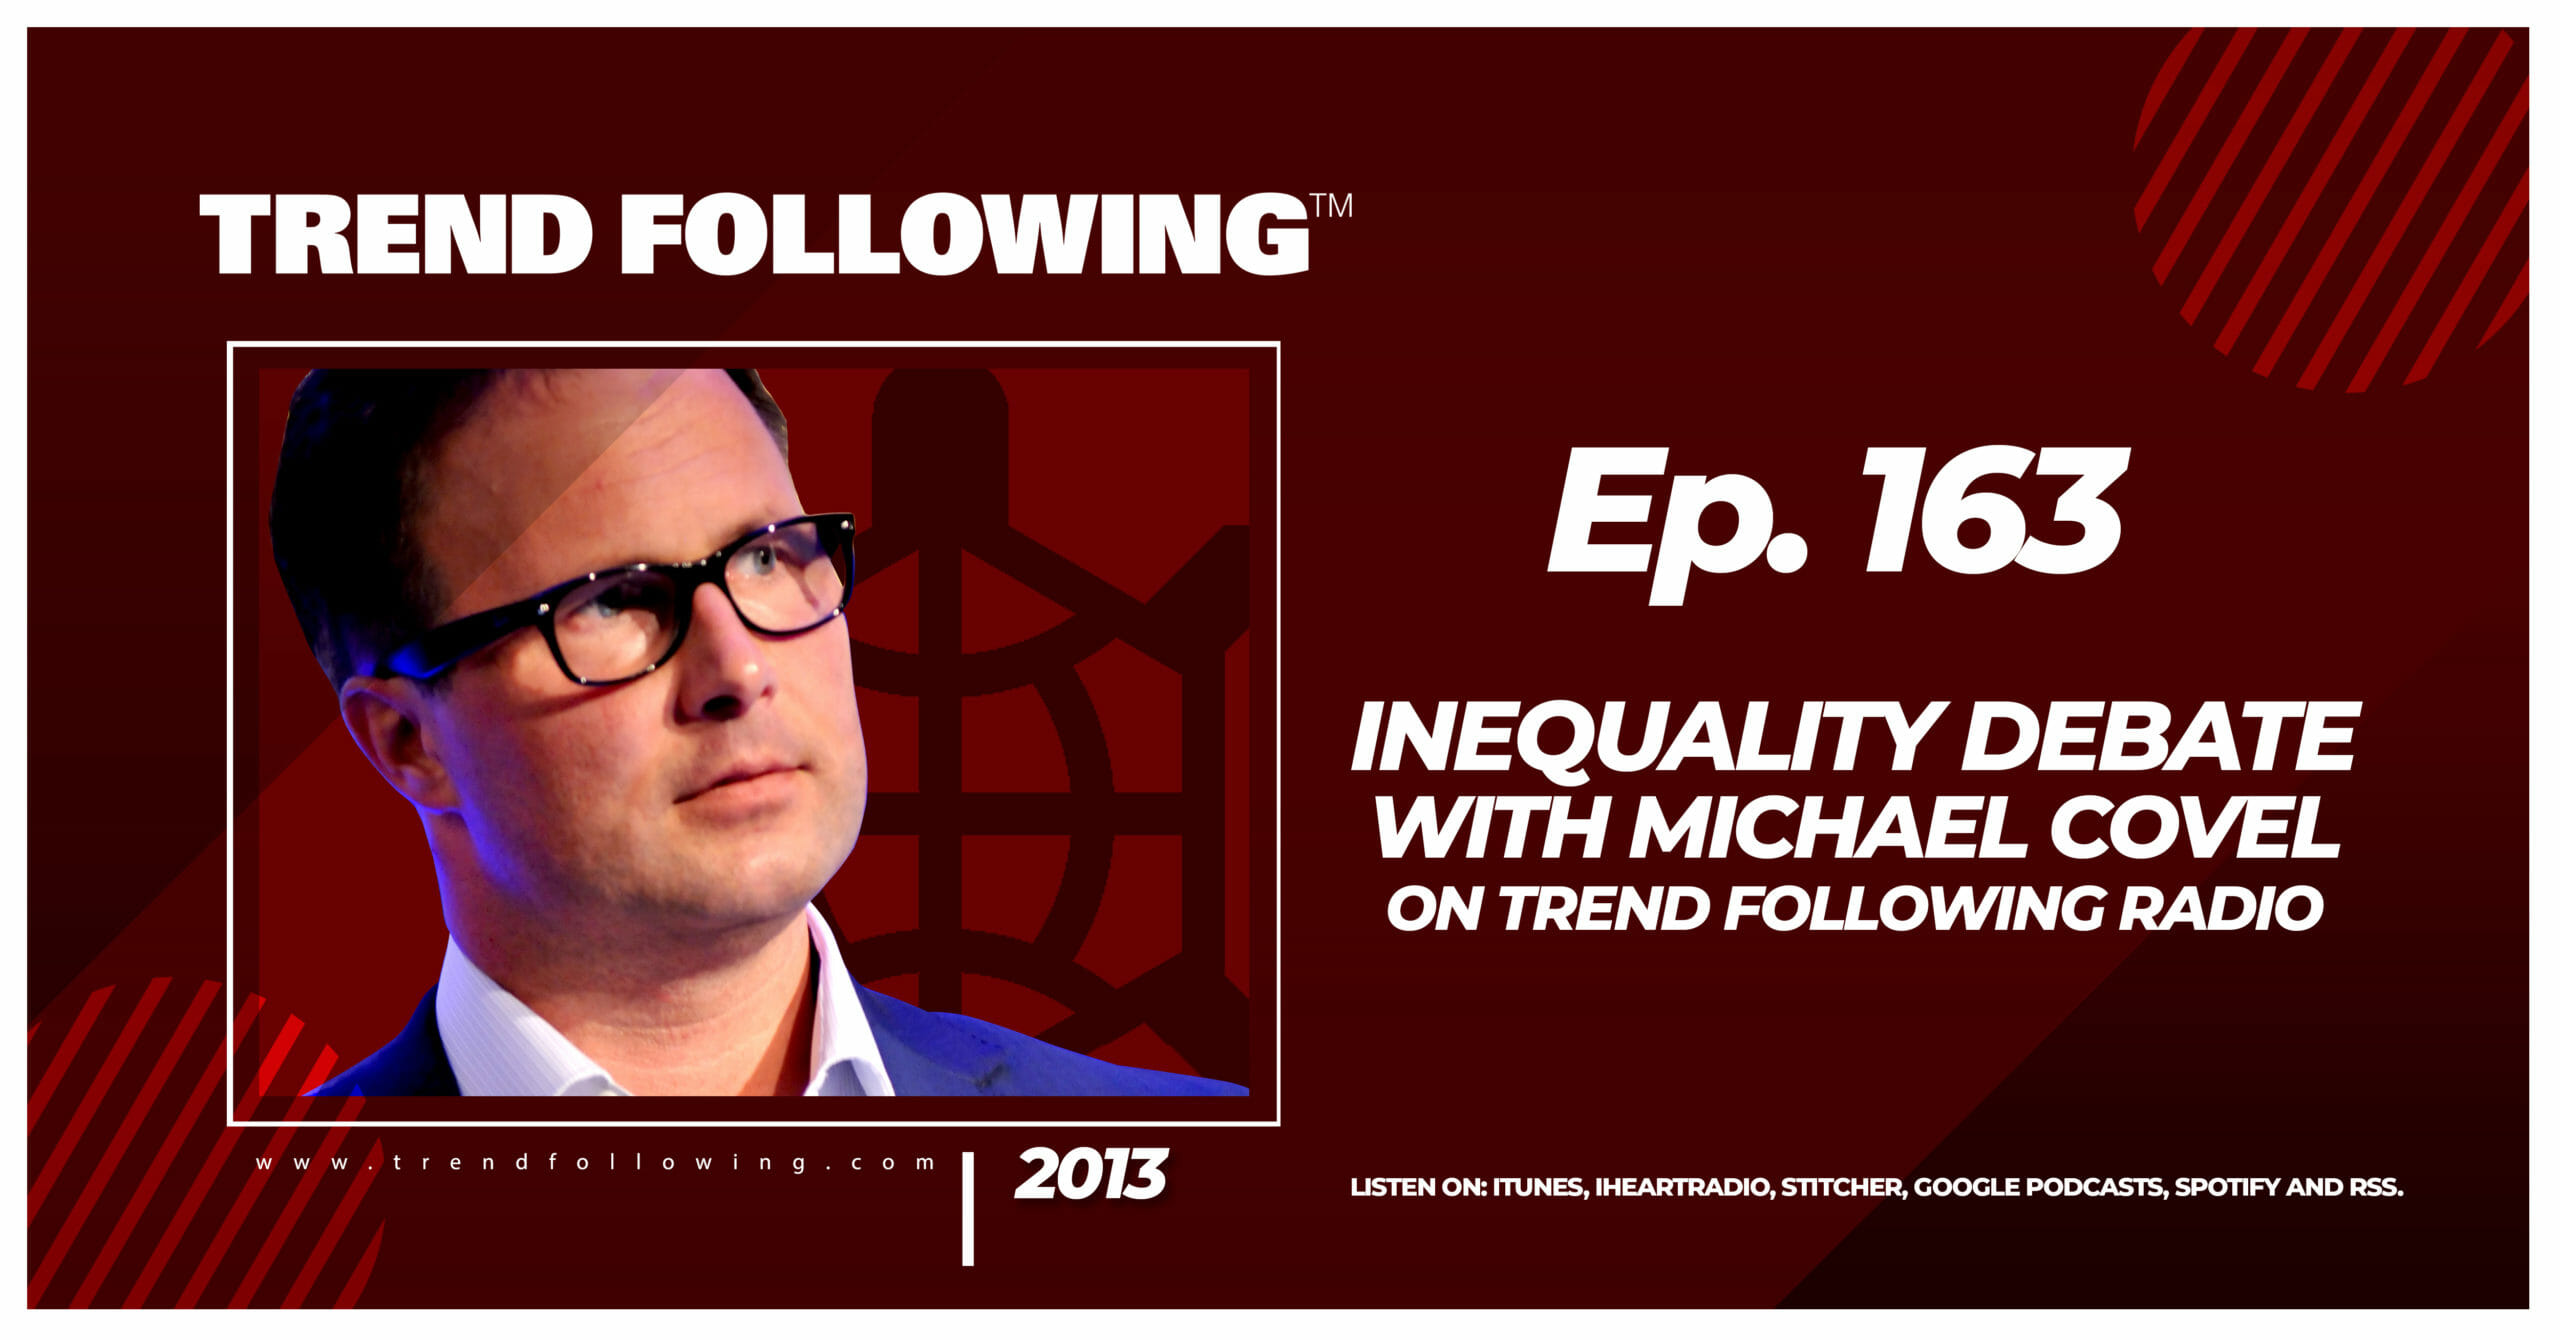 Inequality Debate with Michael Covel on Trend Following Radio